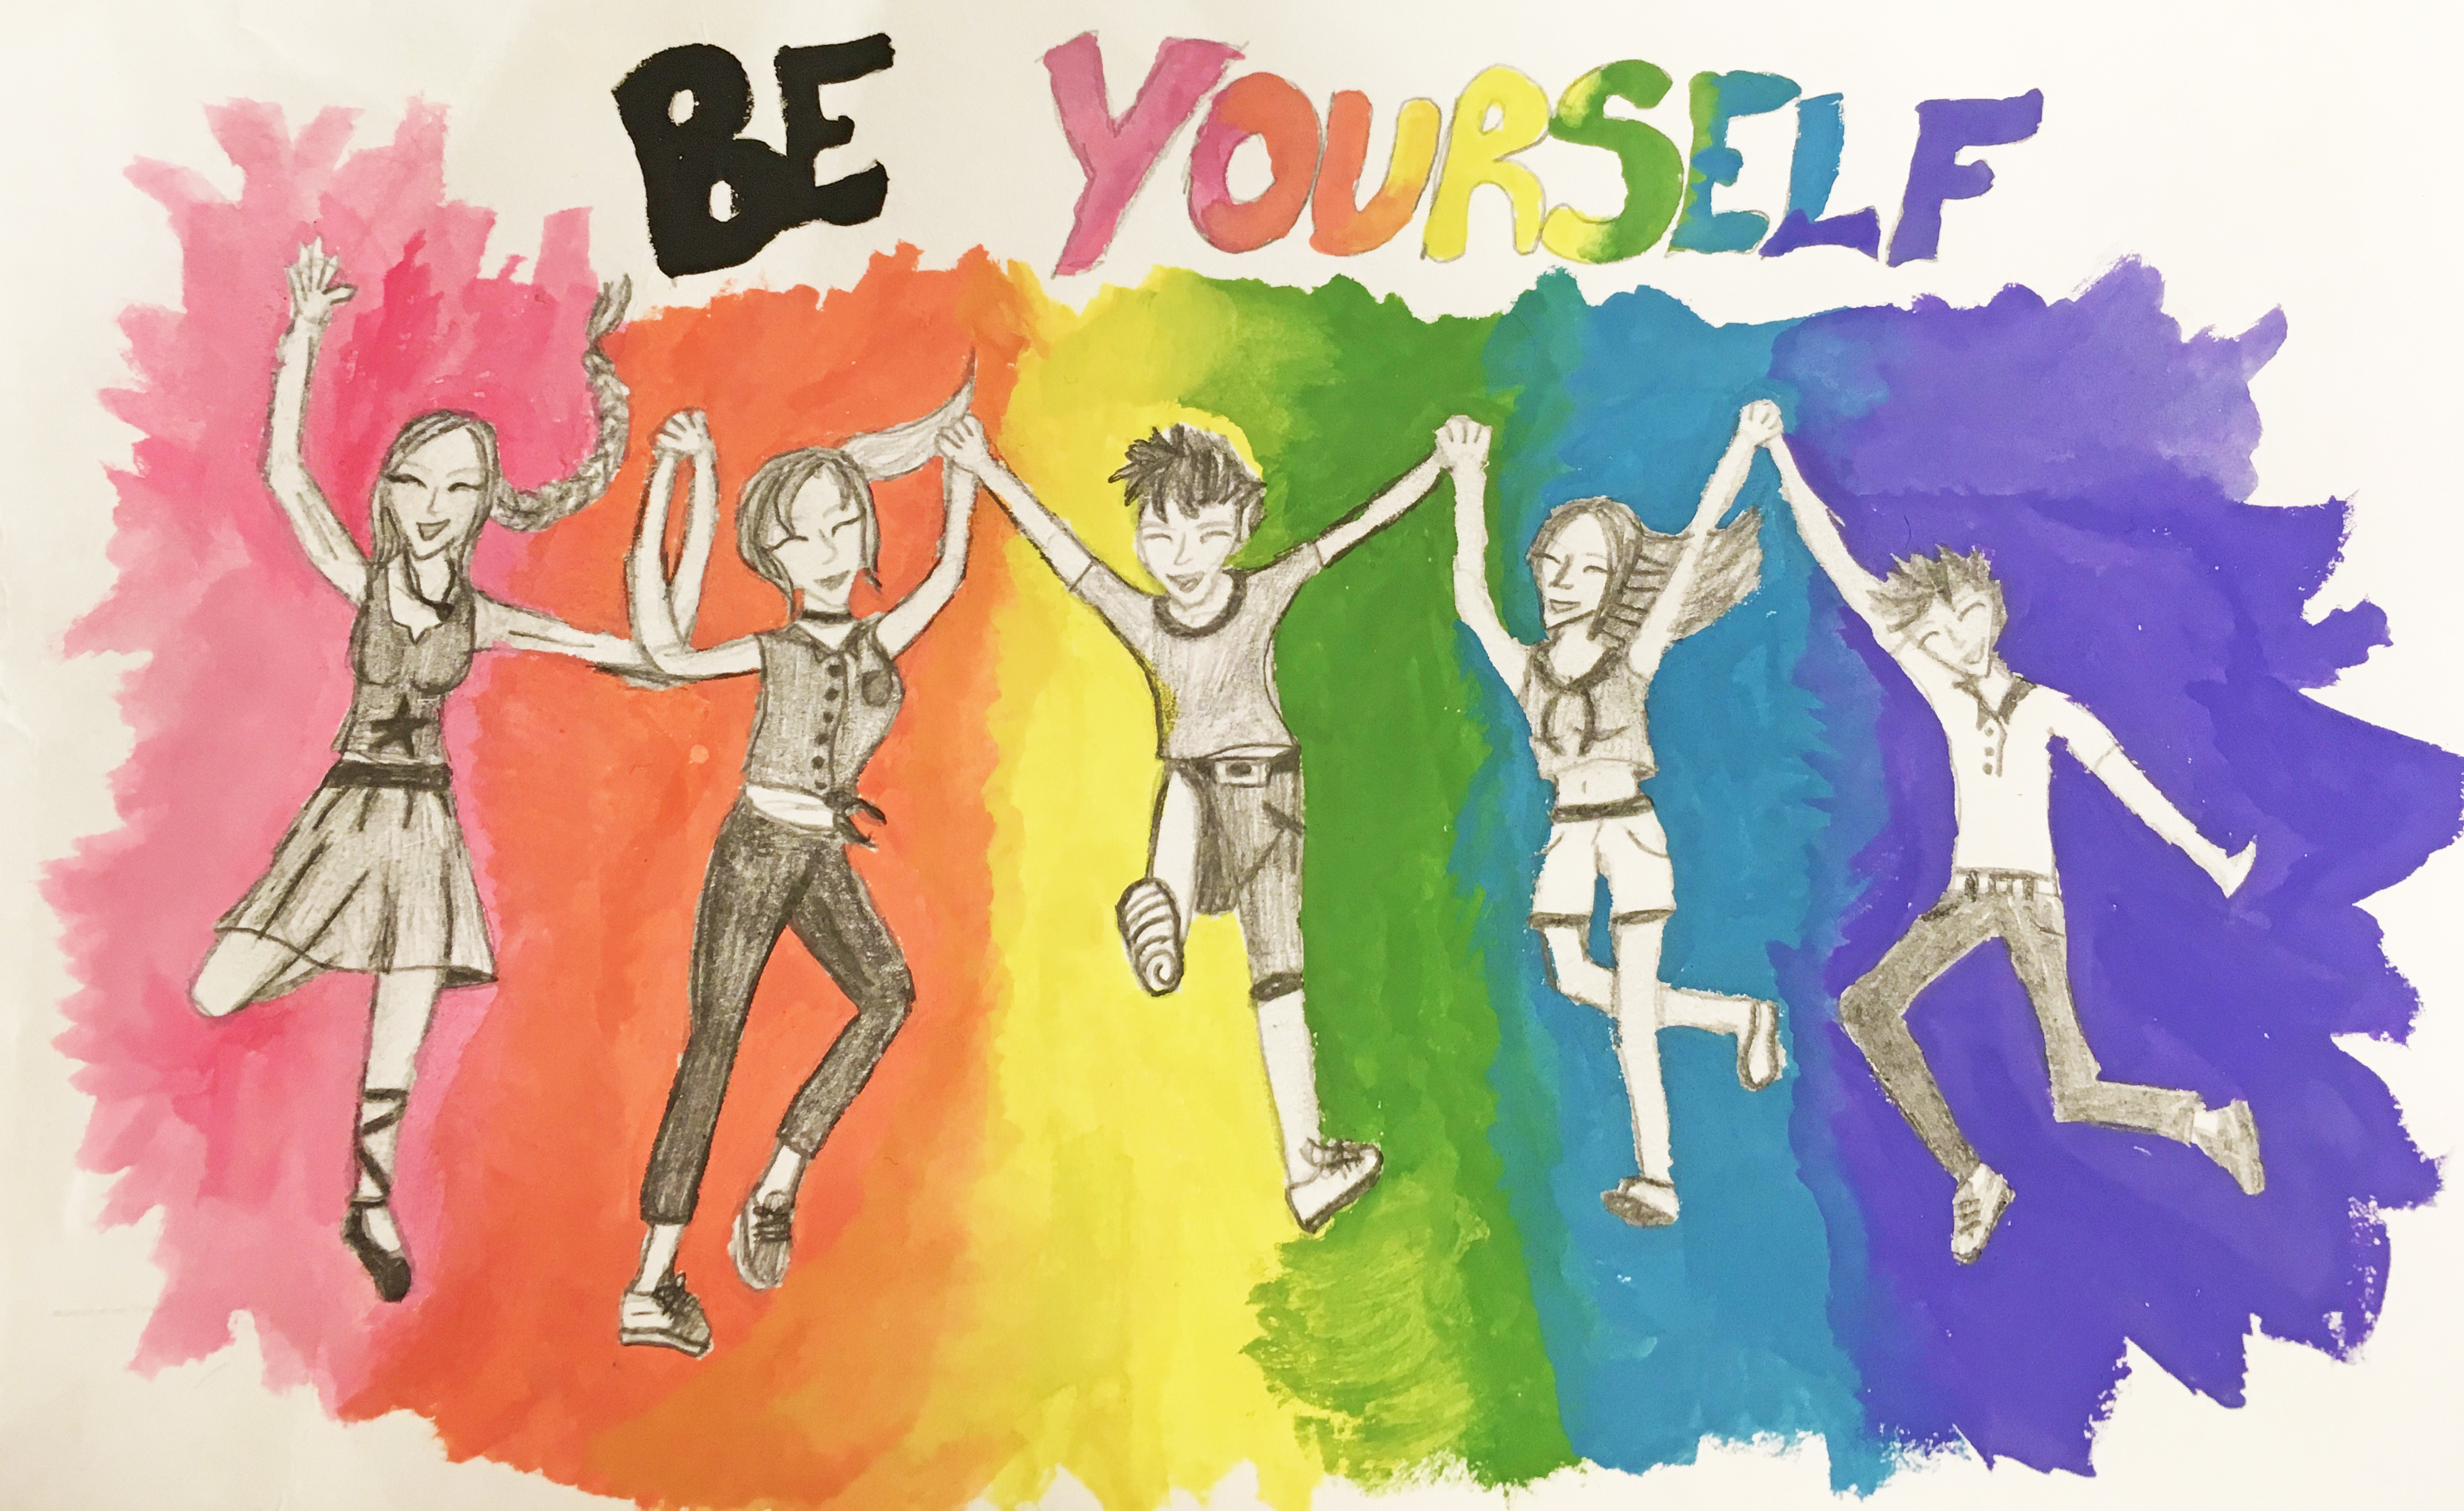 Artwork of a group of people jumping into the air with text 'Be Yourself.'